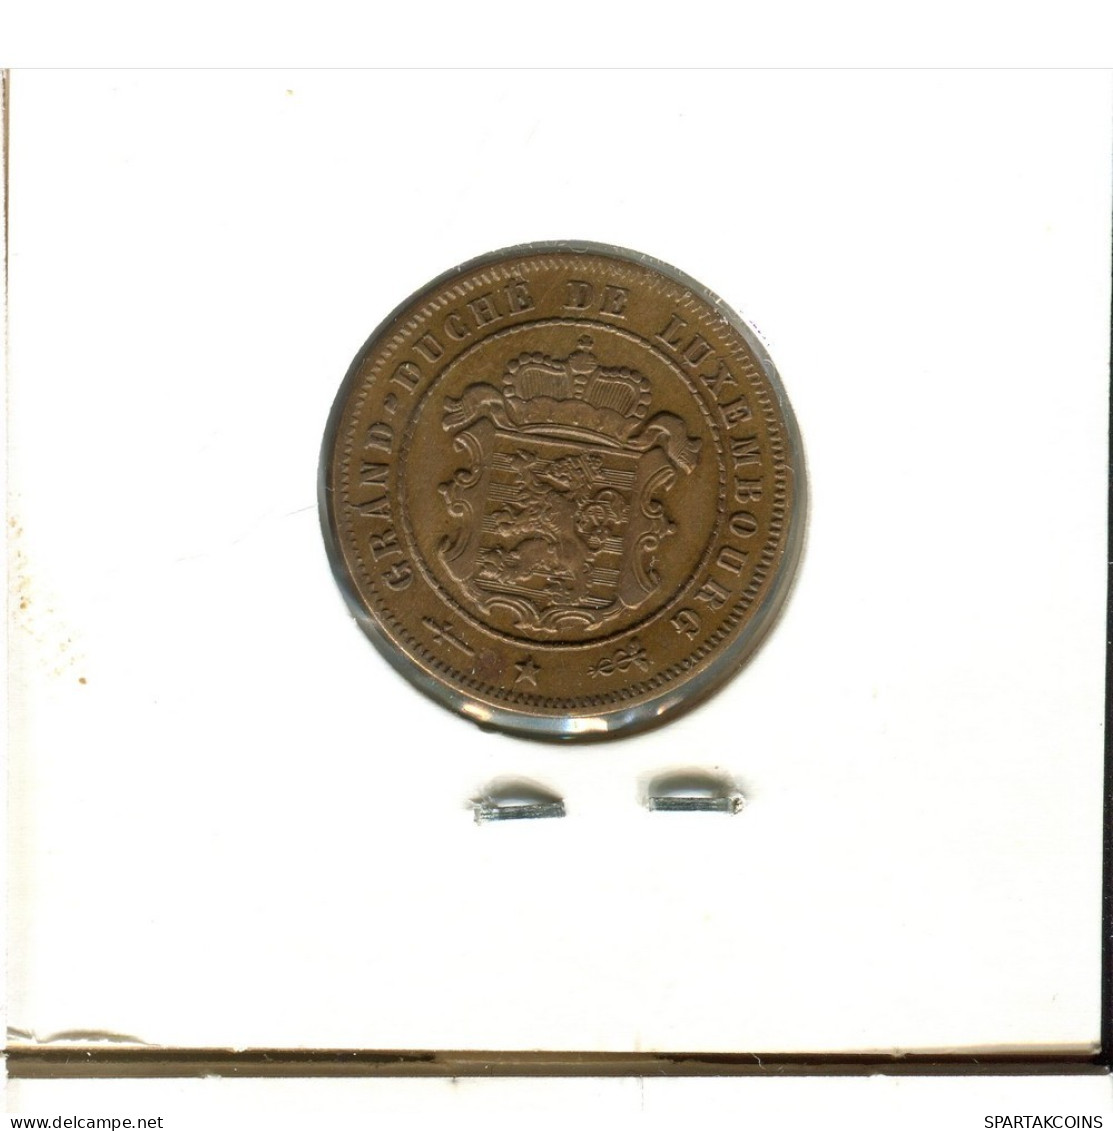 2 1/2 CENTIMES 1908 LUXEMBOURG Coin #AT172.U.A - Lussemburgo